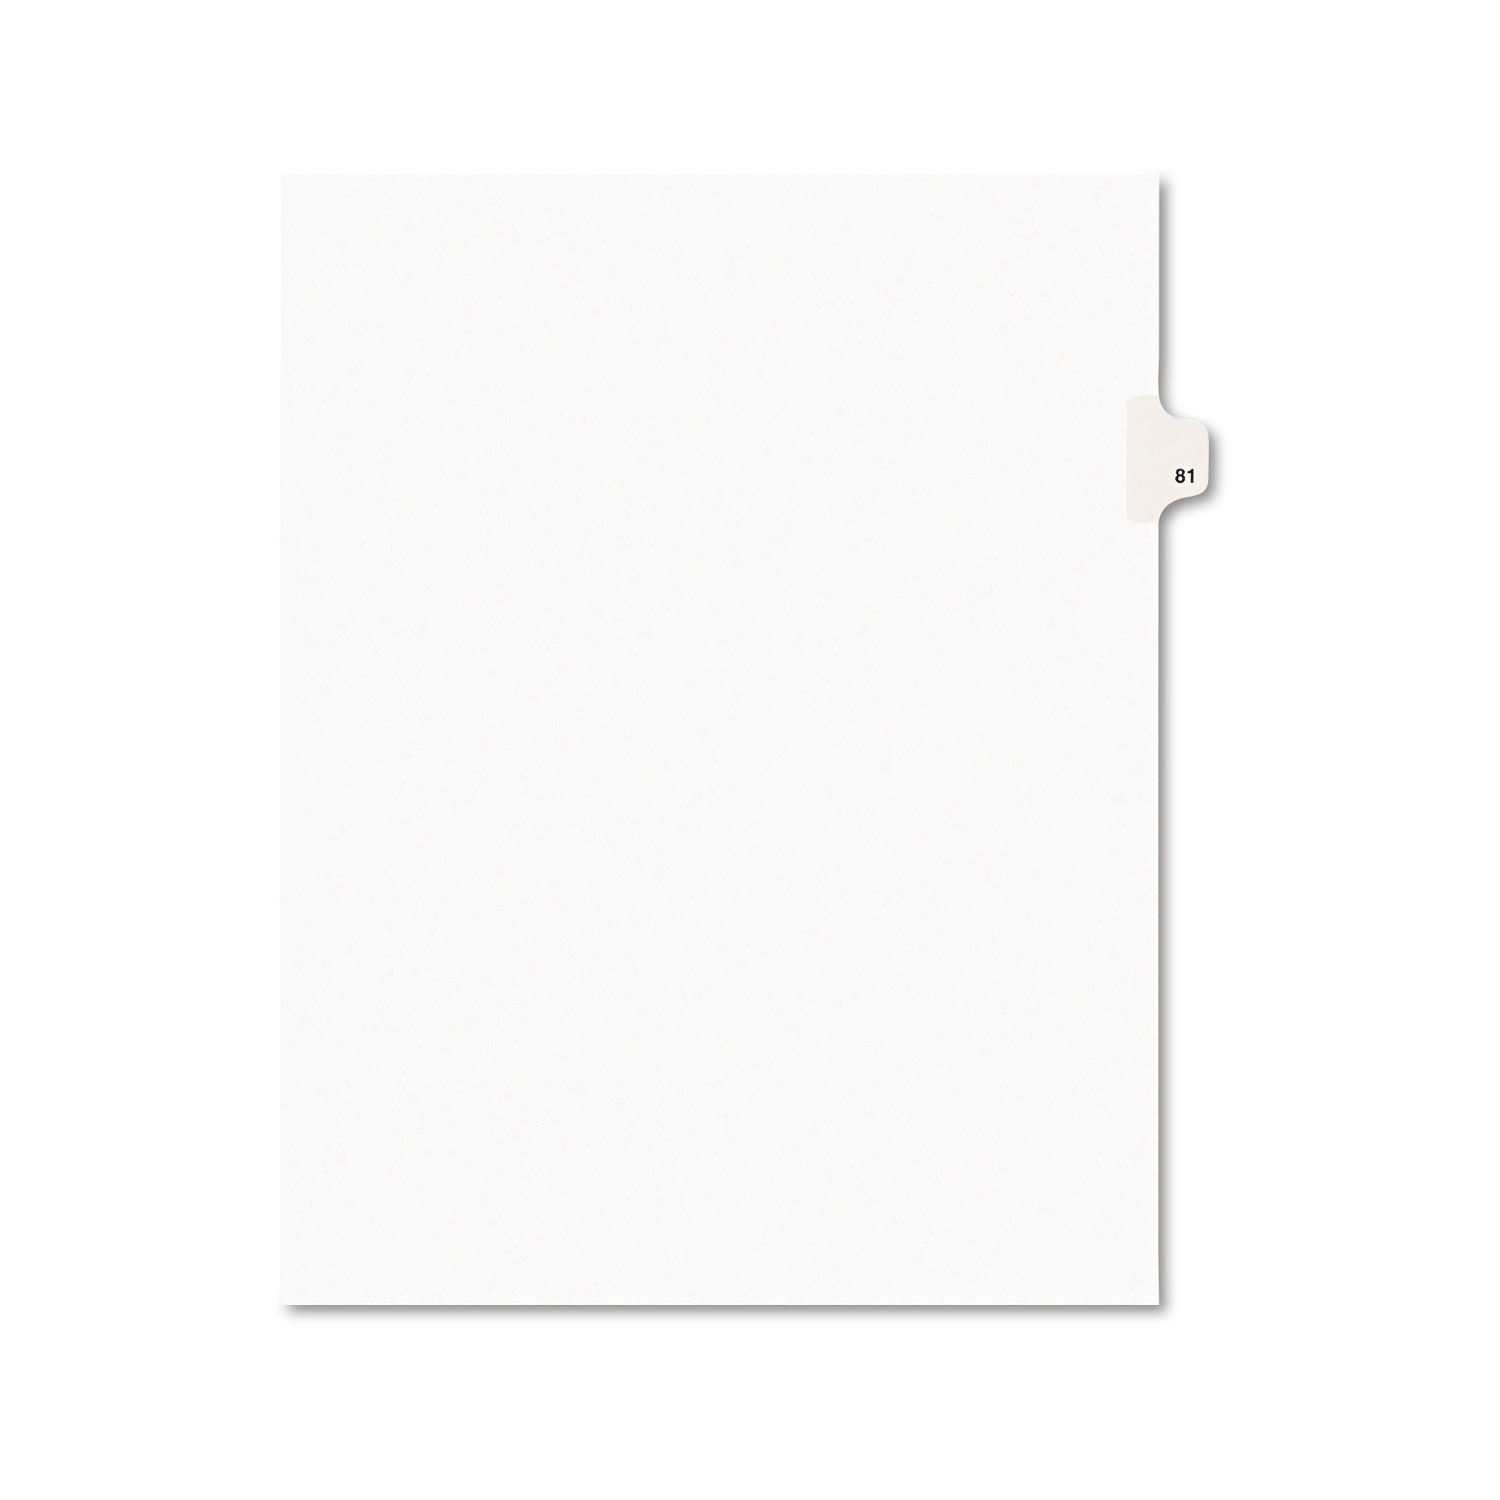  Avery 01081 Preprinted Legal Exhibit Side Tab Index Dividers, Avery Style, 10-Tab, 81, 11 x 8.5, White, 25/Pack (AVE01081) 